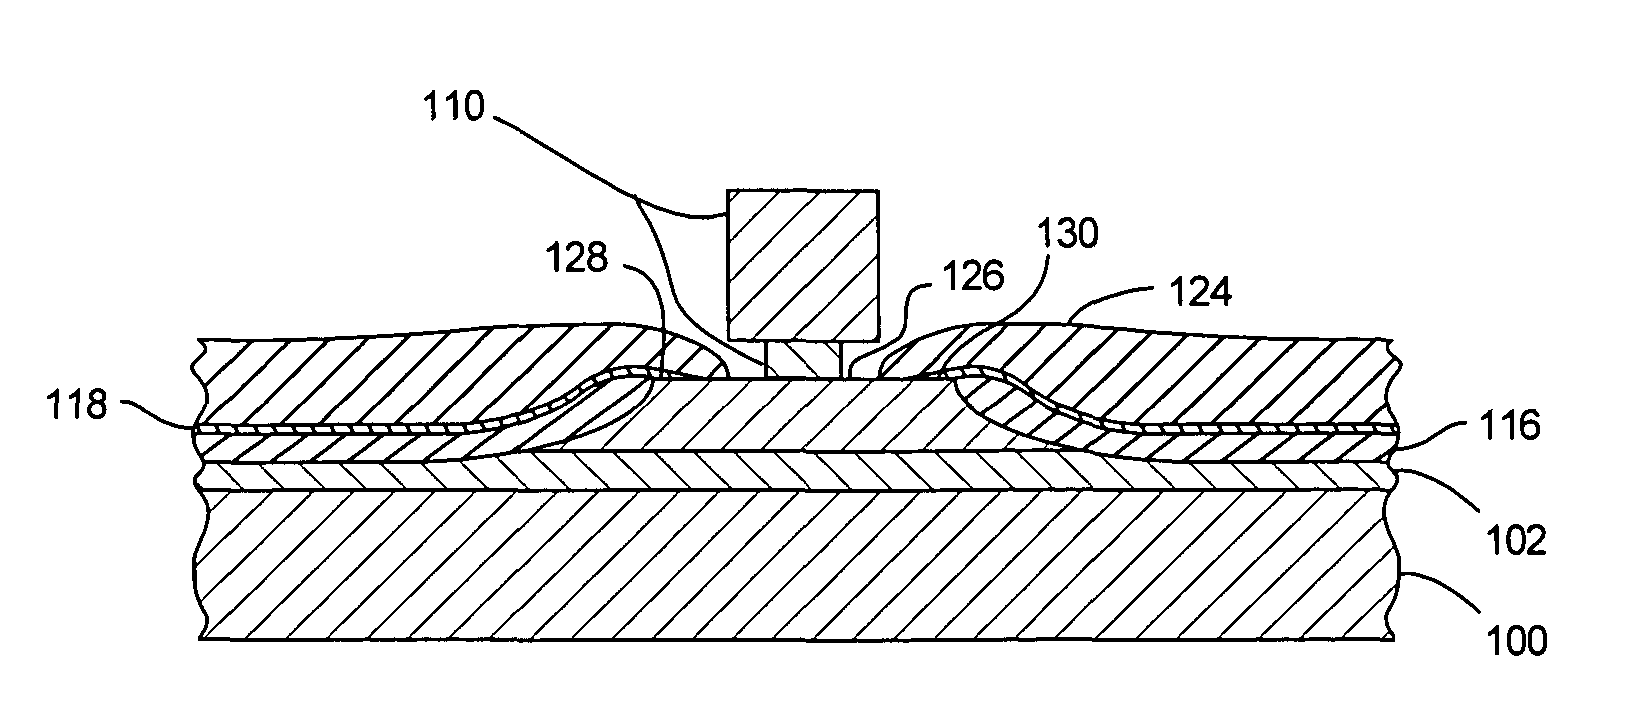 Self-aligned method for fabricating a high density GMR read element